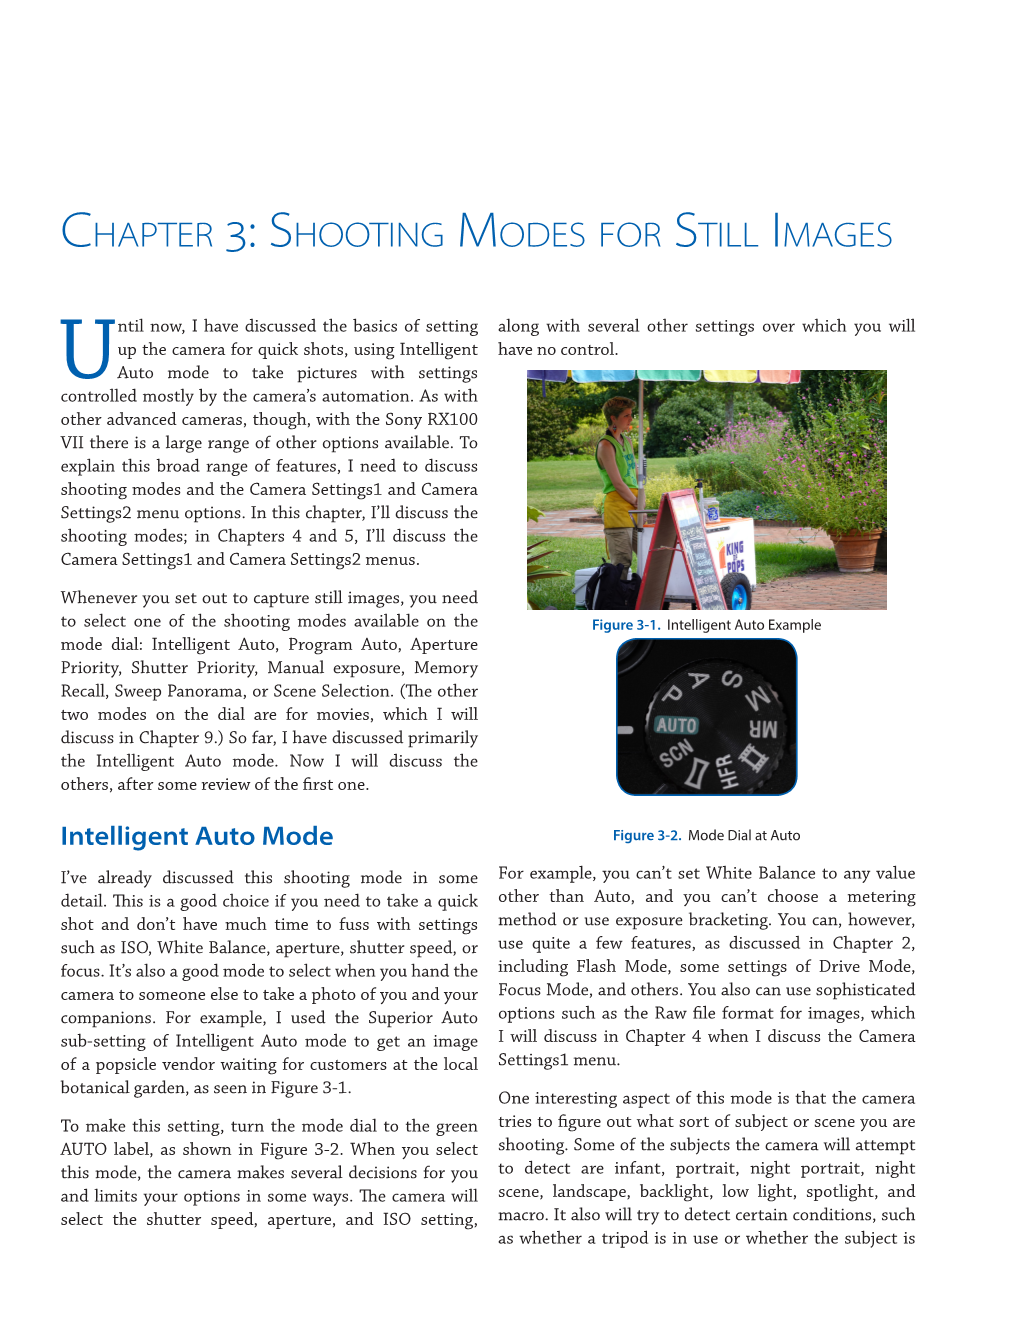 Shooting Modes for Still Images